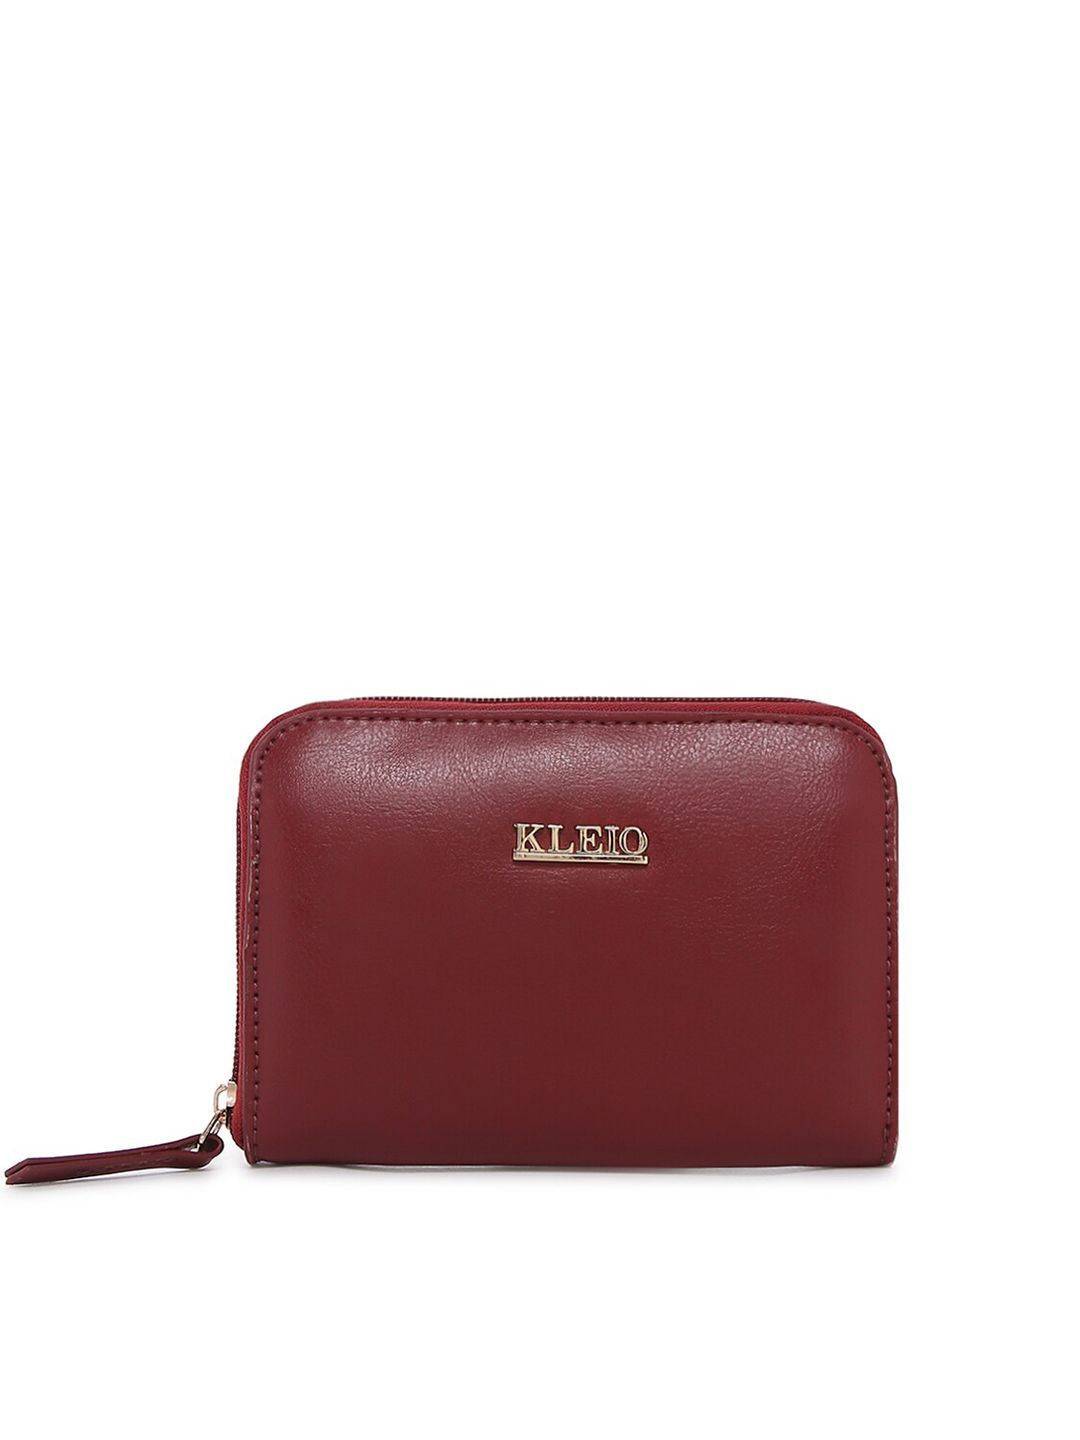 KLEIO Women Maroon Solid Synthetic Leather Zip Around Wallet Price in India